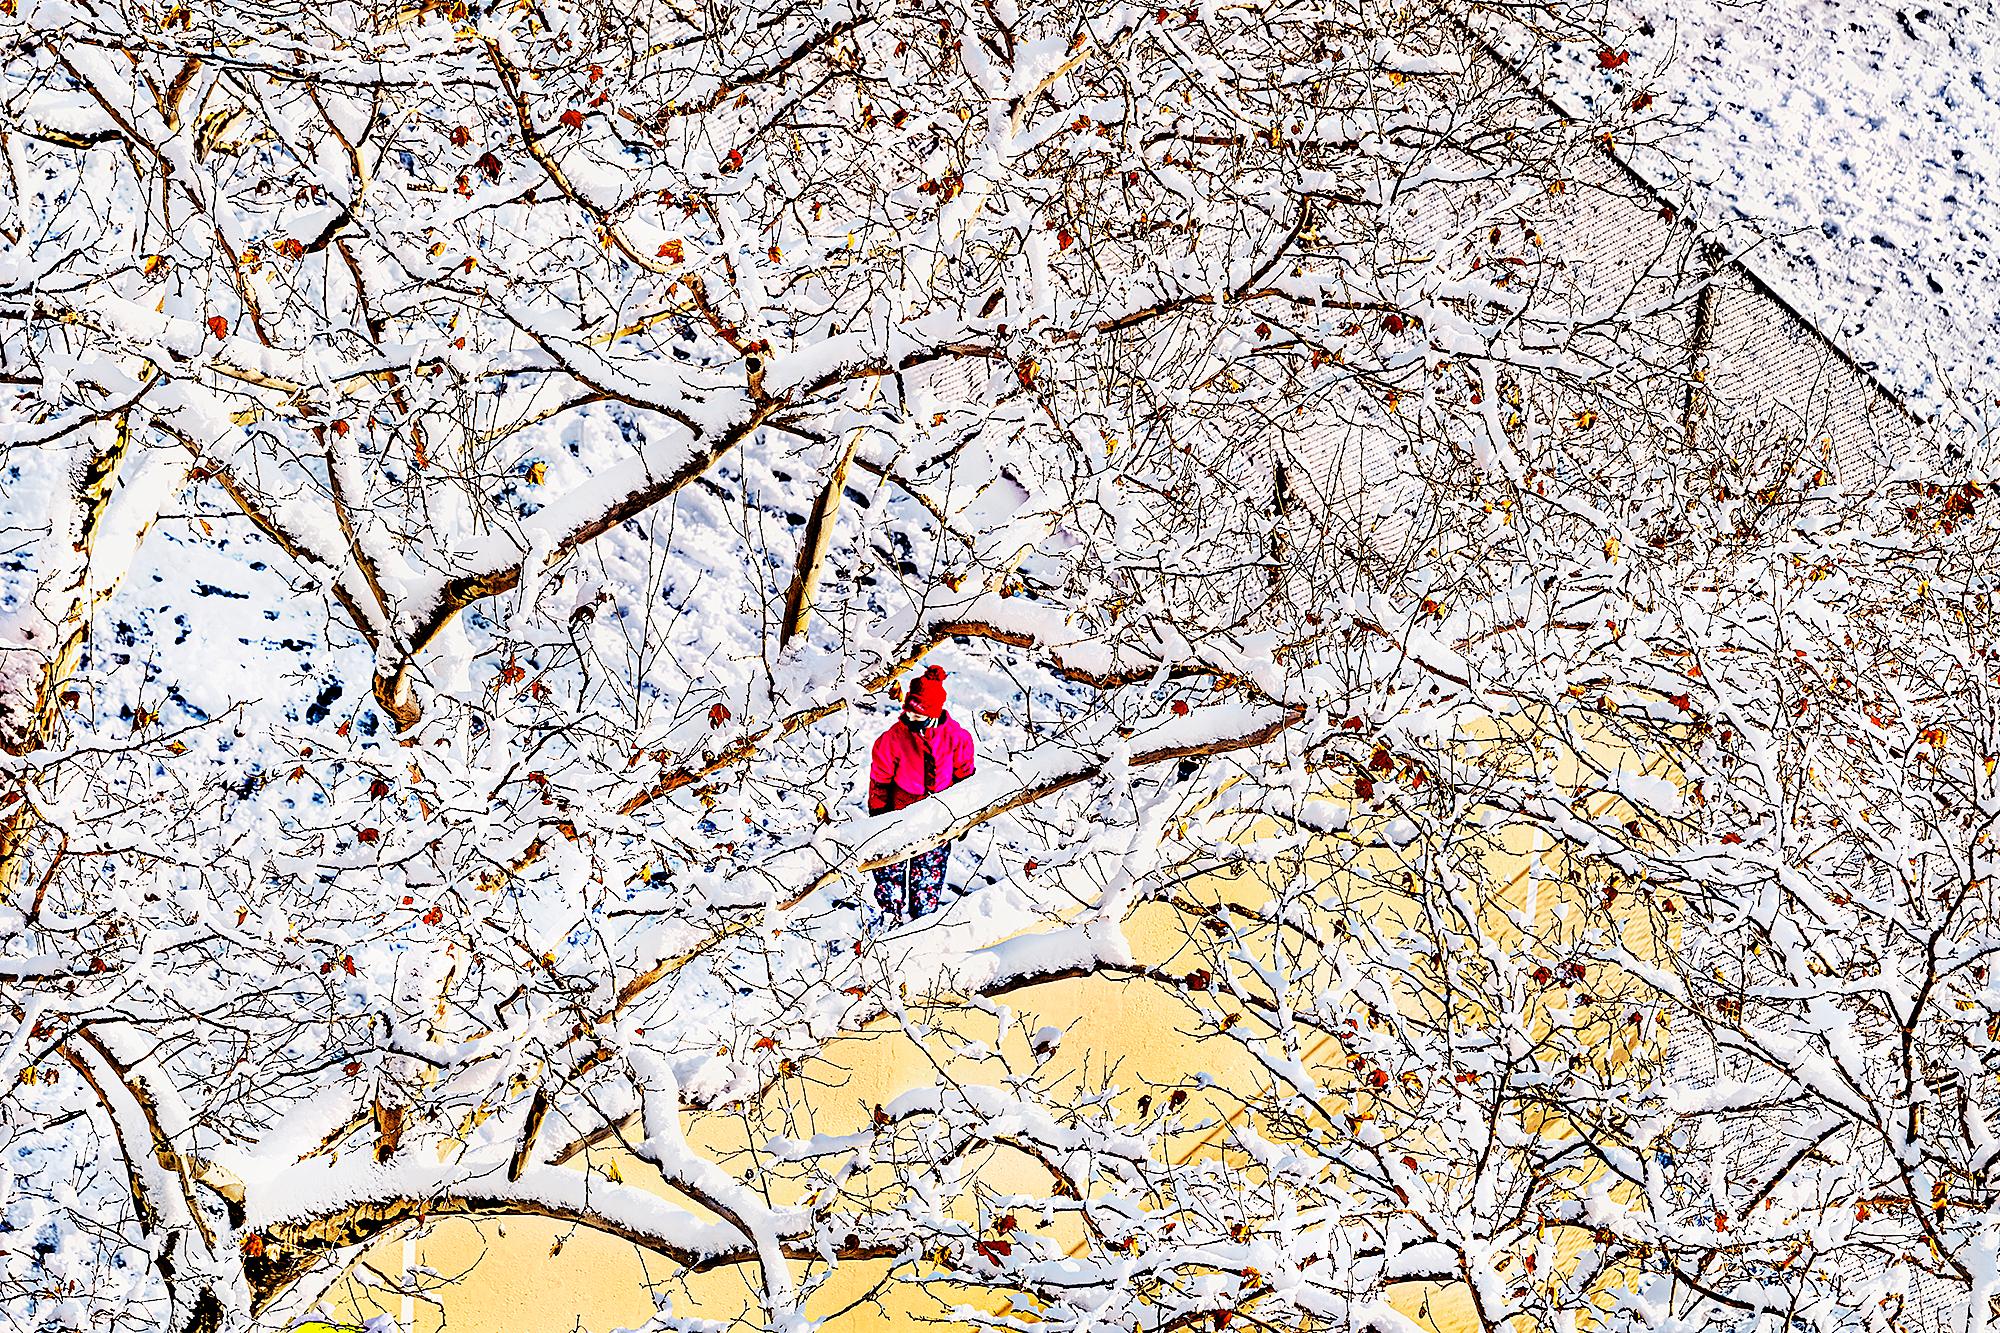 Mitchell Funk Landscape Photograph - Abstract Winter Scene with Single Figure in Red Coat